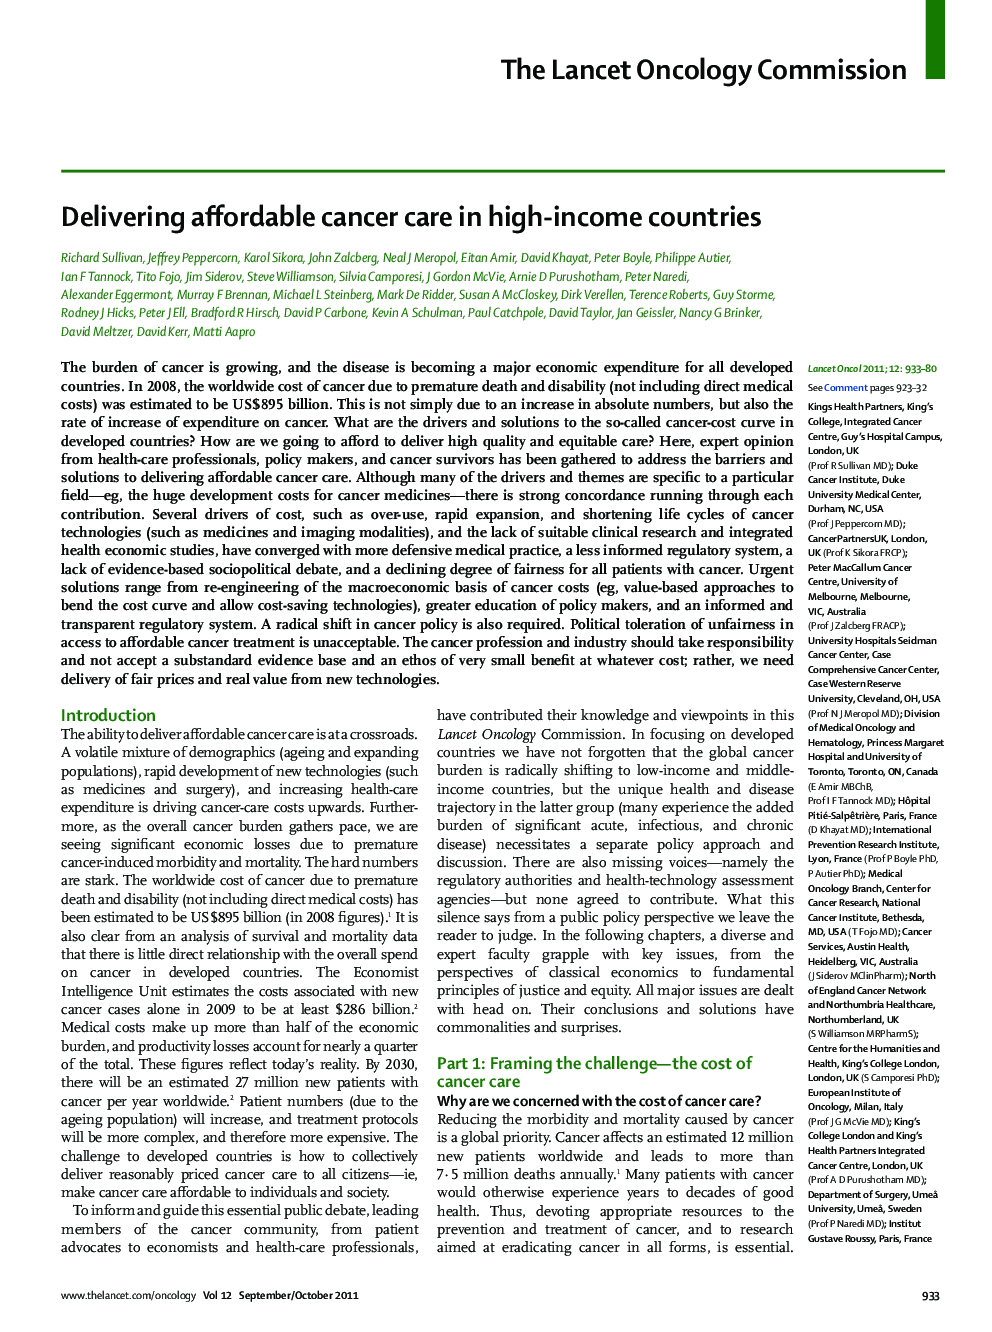 Delivering affordable cancer care in high-income countries